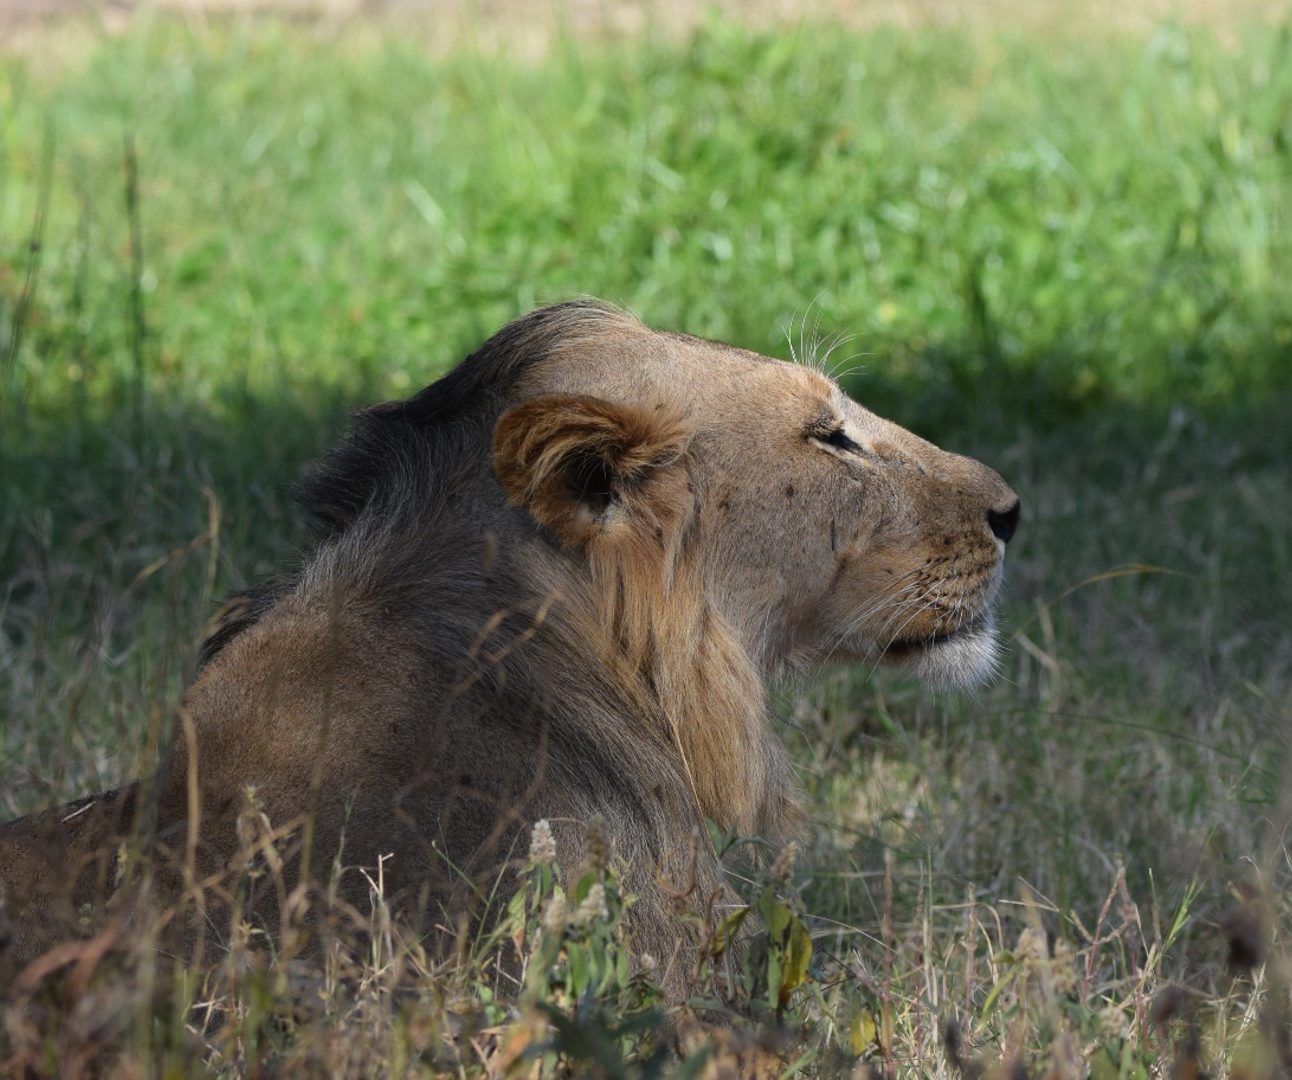 A young wild lion lying in the long grass with his mane blowing in the wind